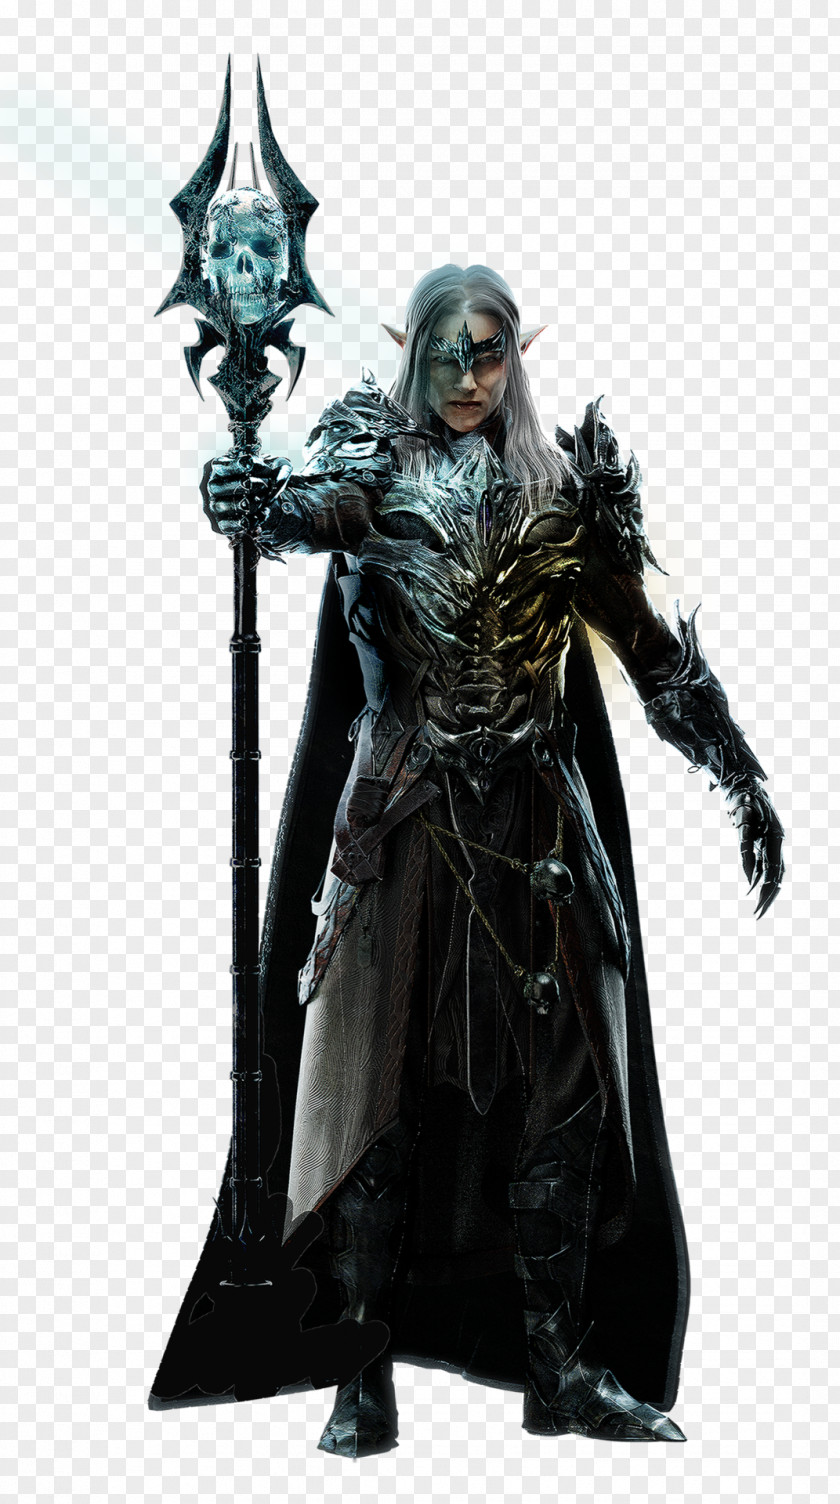 Elder Scrolls Concept Art Shivering Isles The Online Lich PNG